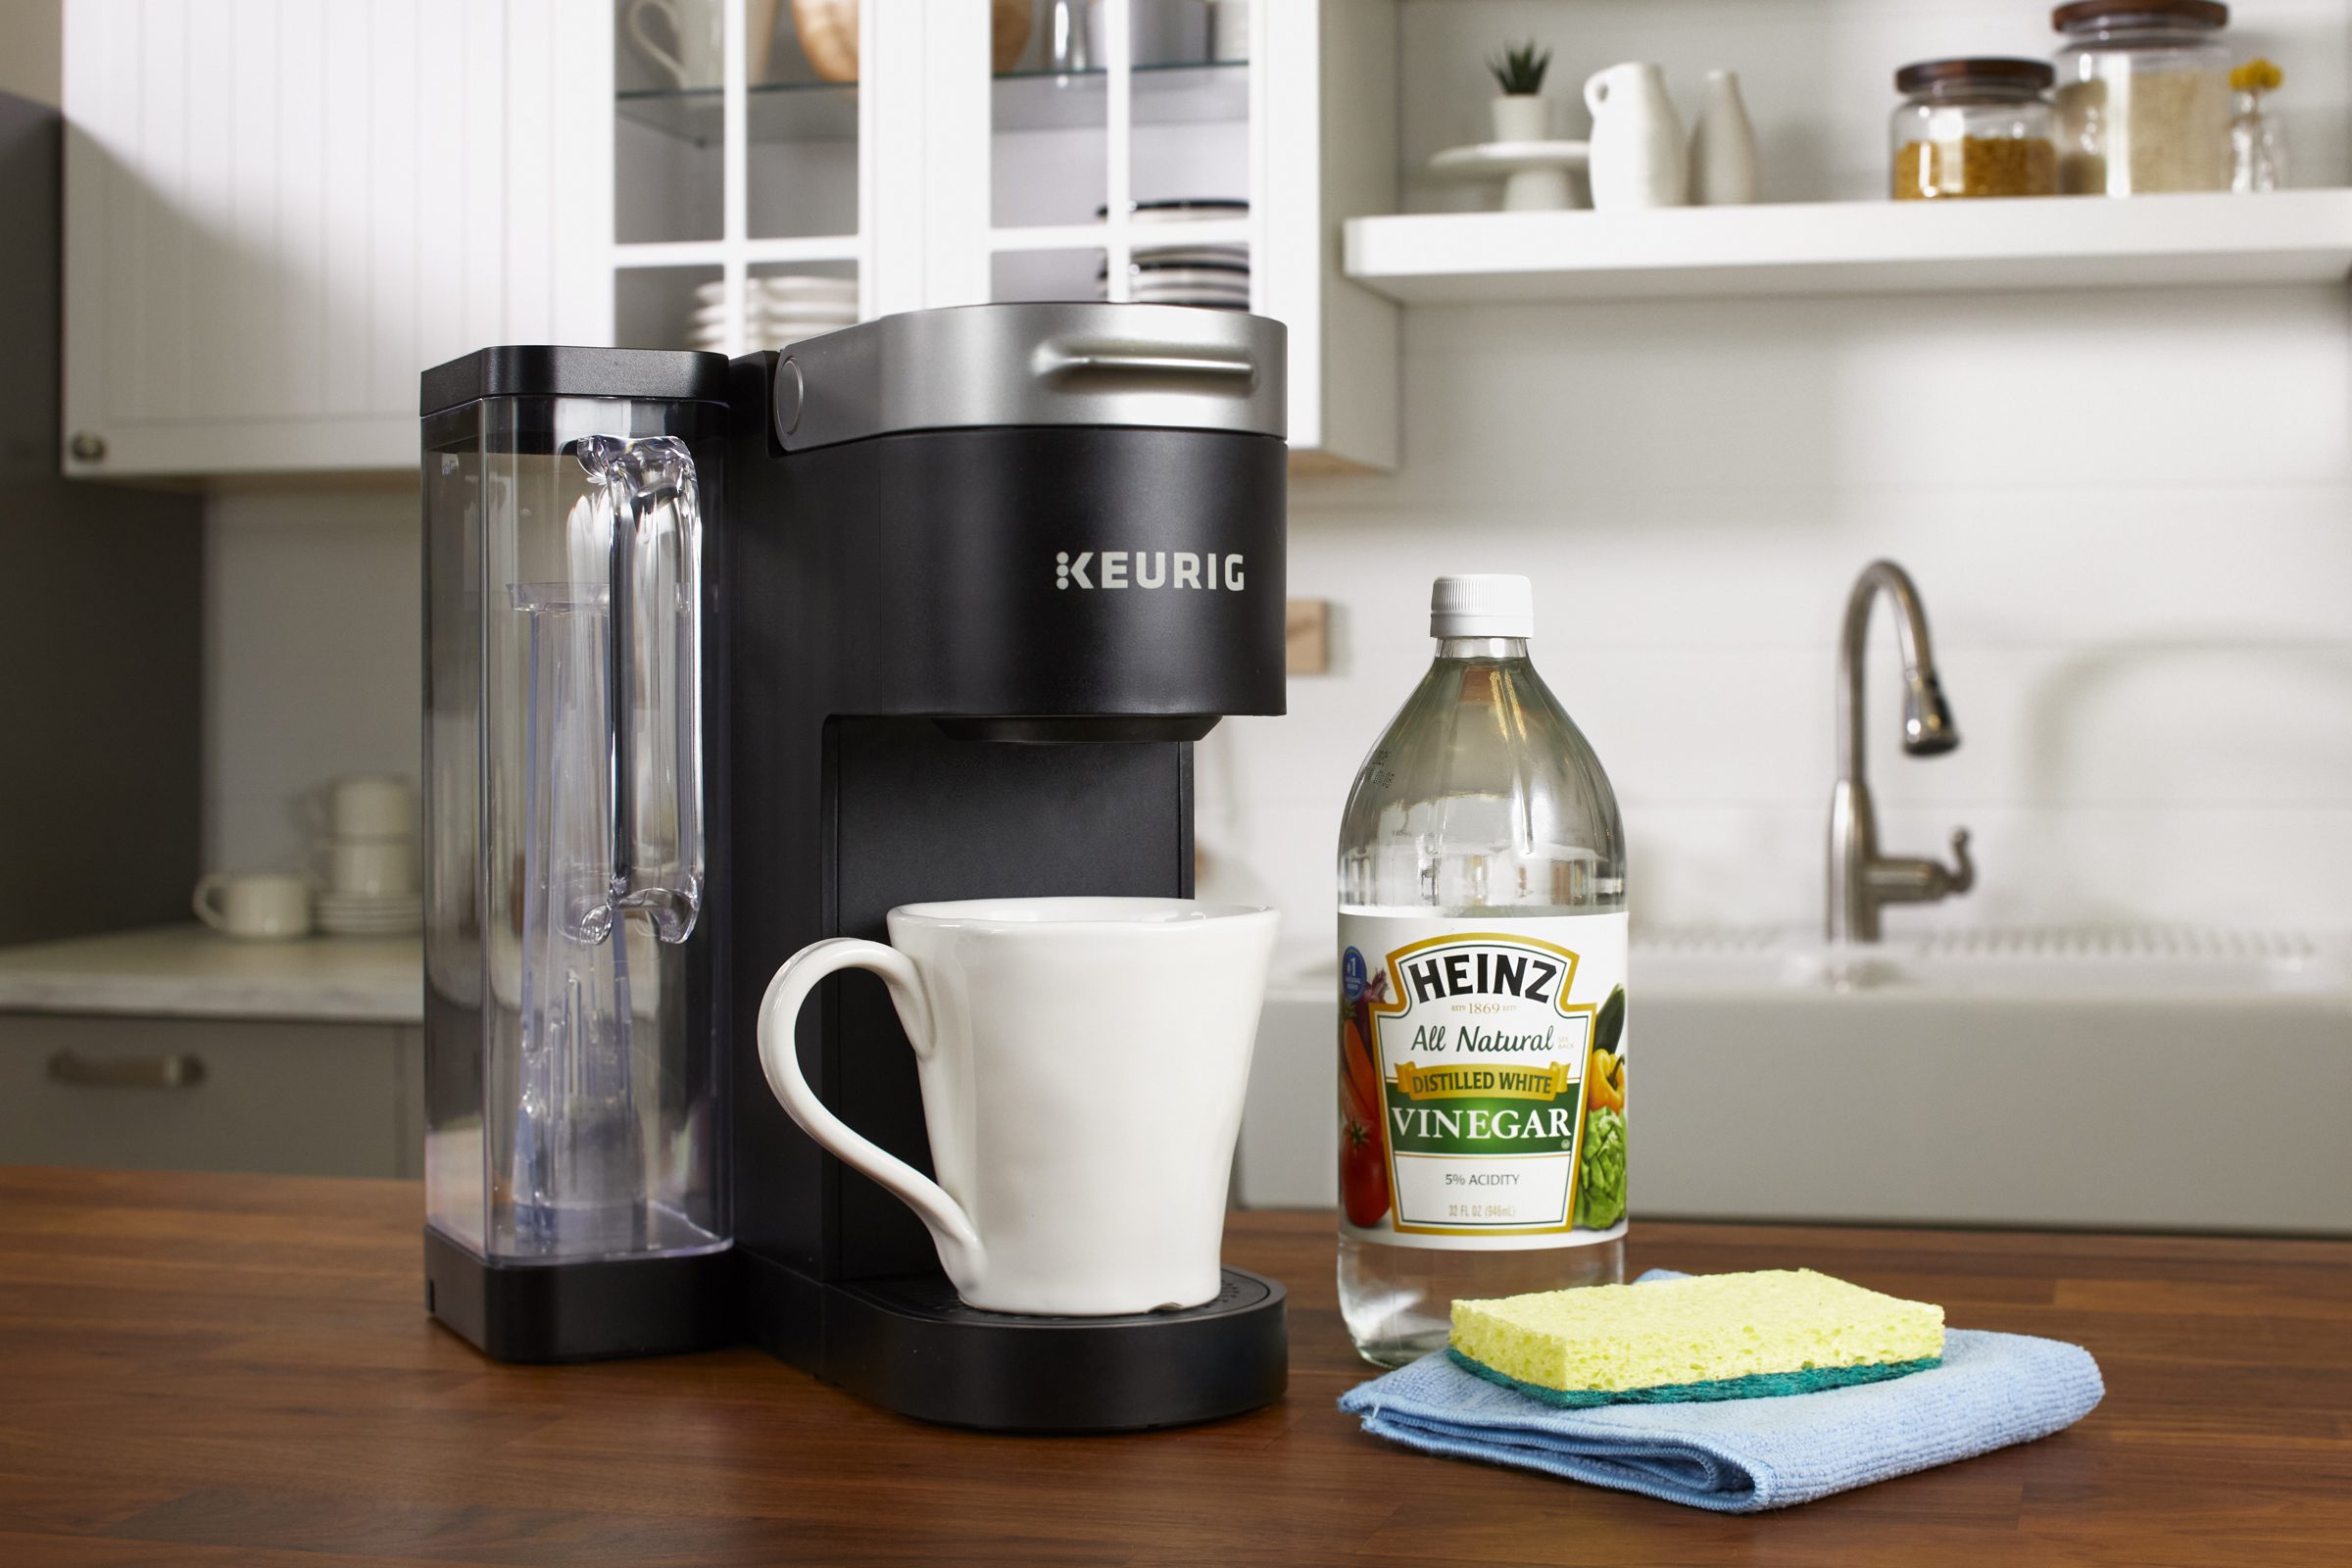 https://www.rd.com/wp-content/uploads/2019/01/keurig-coffee-maker-and-cleaning-supplies-on-kitchen-counter_RDigital_HubCleaning_keurig_003.jpg